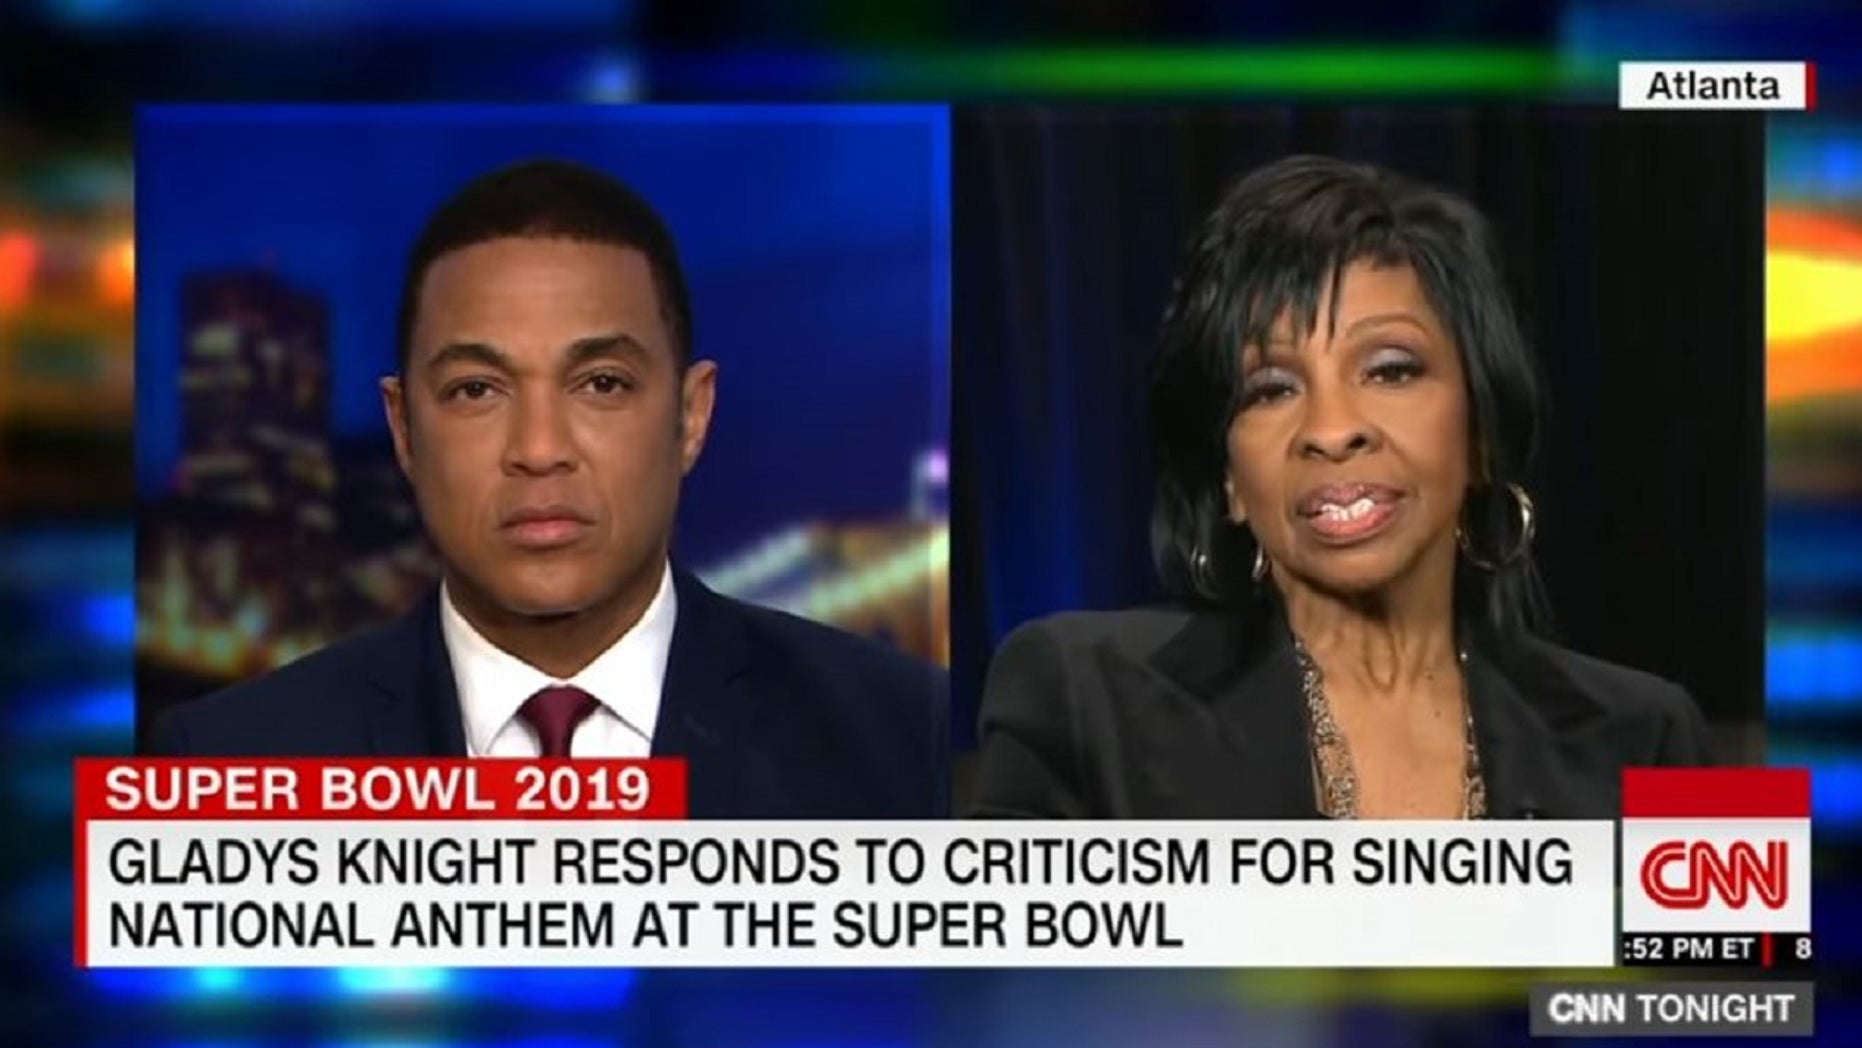 Don Lemon asks music legend Gladys Knight if she’s worried about career after Super Bowl performance